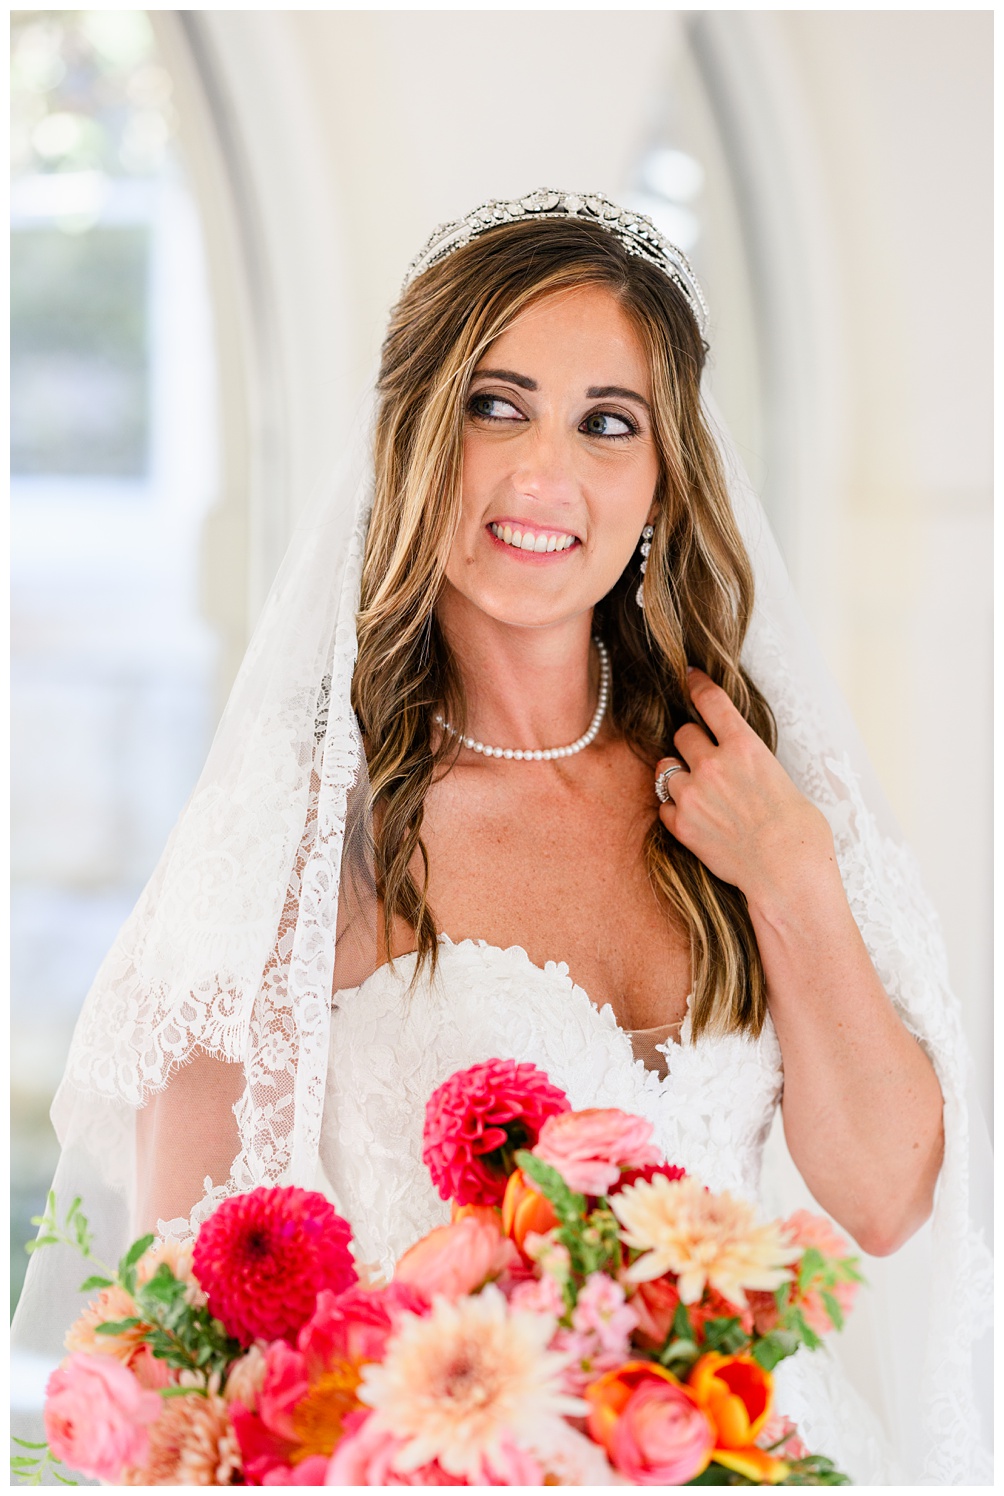 St. Mary's Catholic Church Bridal Portraits with colorful wedding bouquet